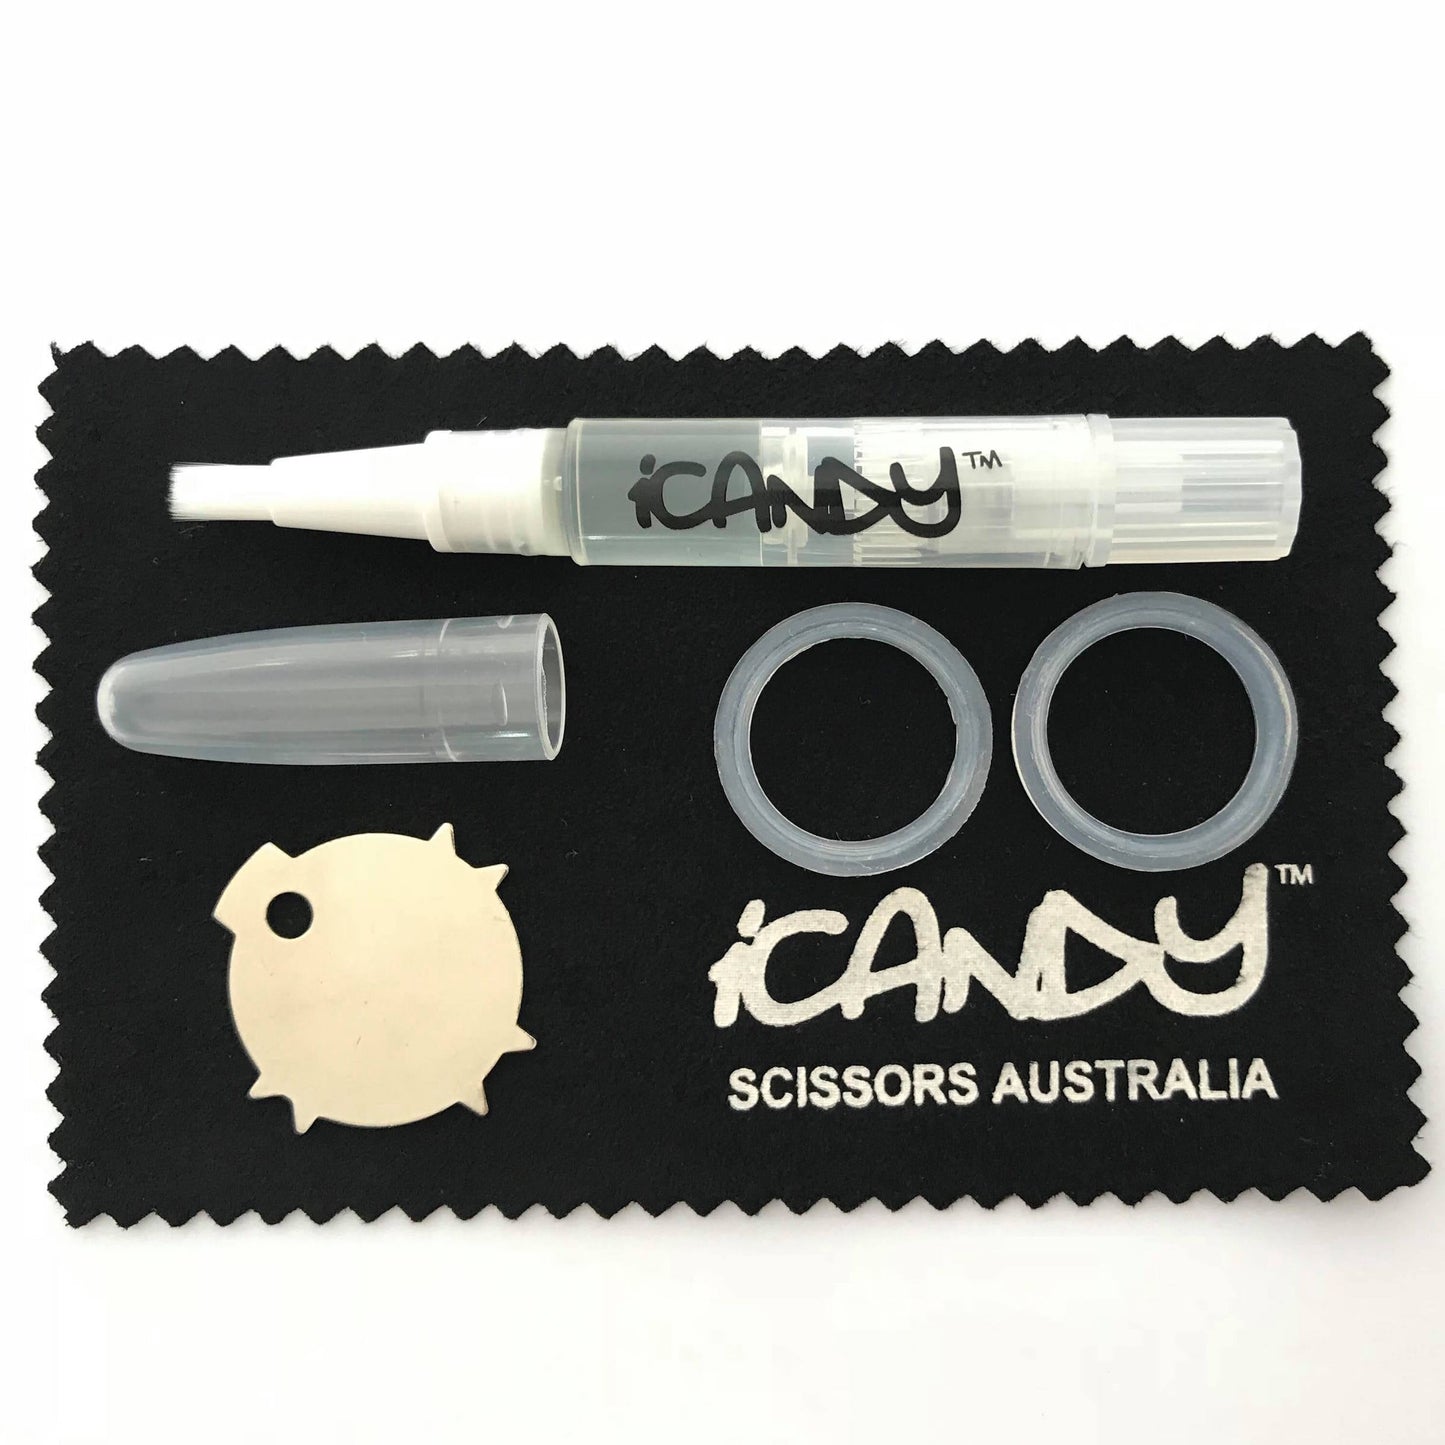 iCandy SLIDER VG10 Scissors (6.0 inch) Limited Edition! - iCandy Scissors